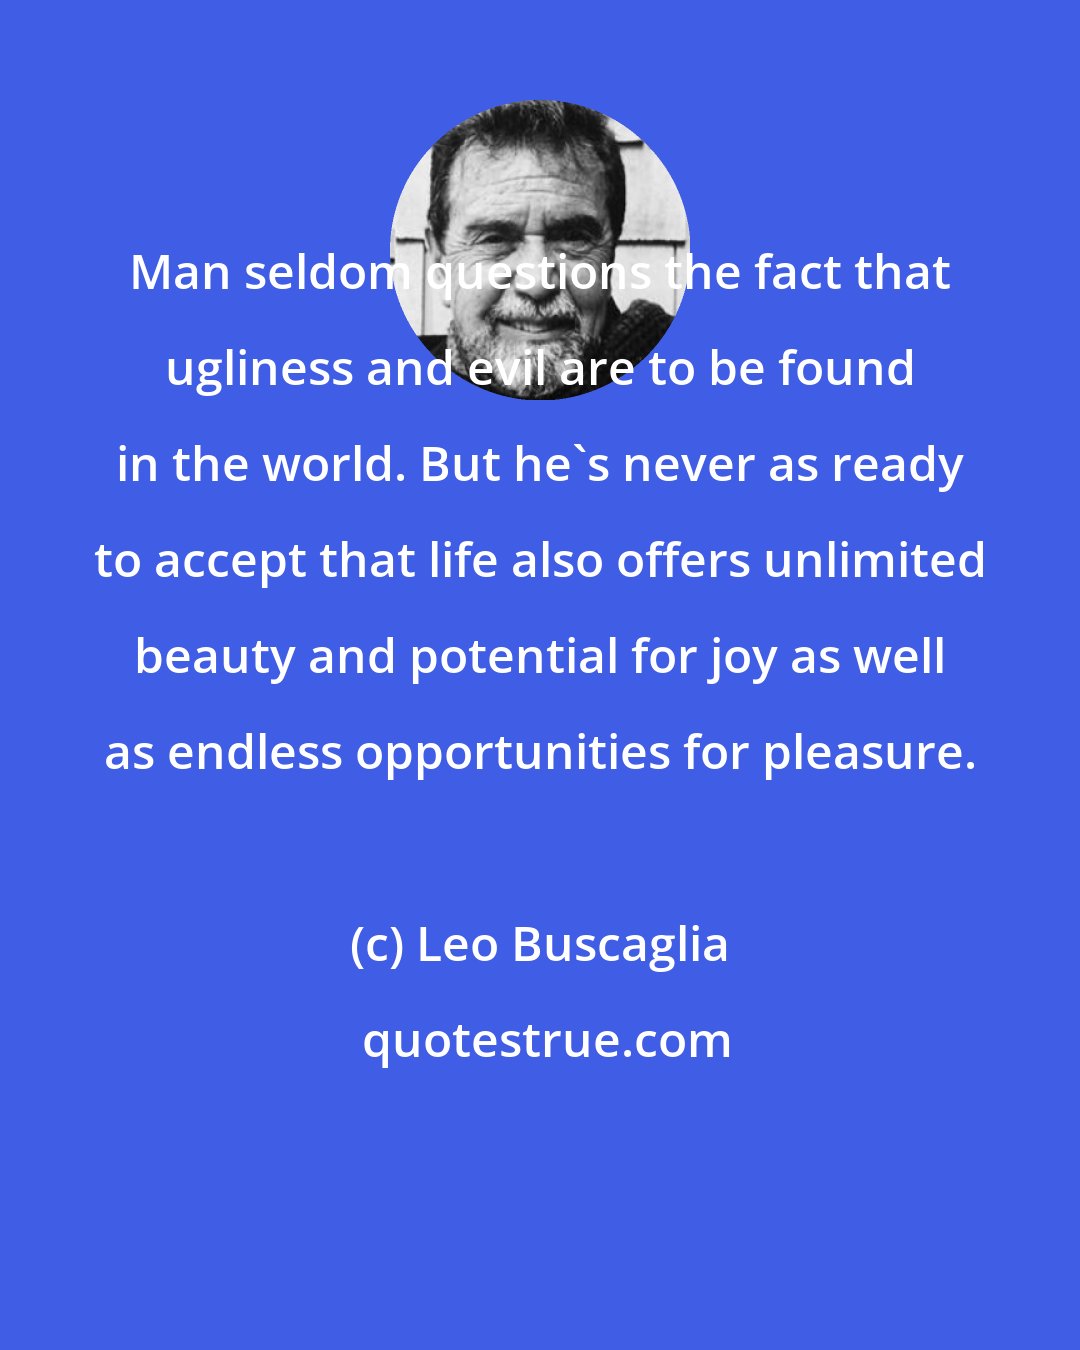 Leo Buscaglia: Man seldom questions the fact that ugliness and evil are to be found in the world. But he's never as ready to accept that life also offers unlimited beauty and potential for joy as well as endless opportunities for pleasure.